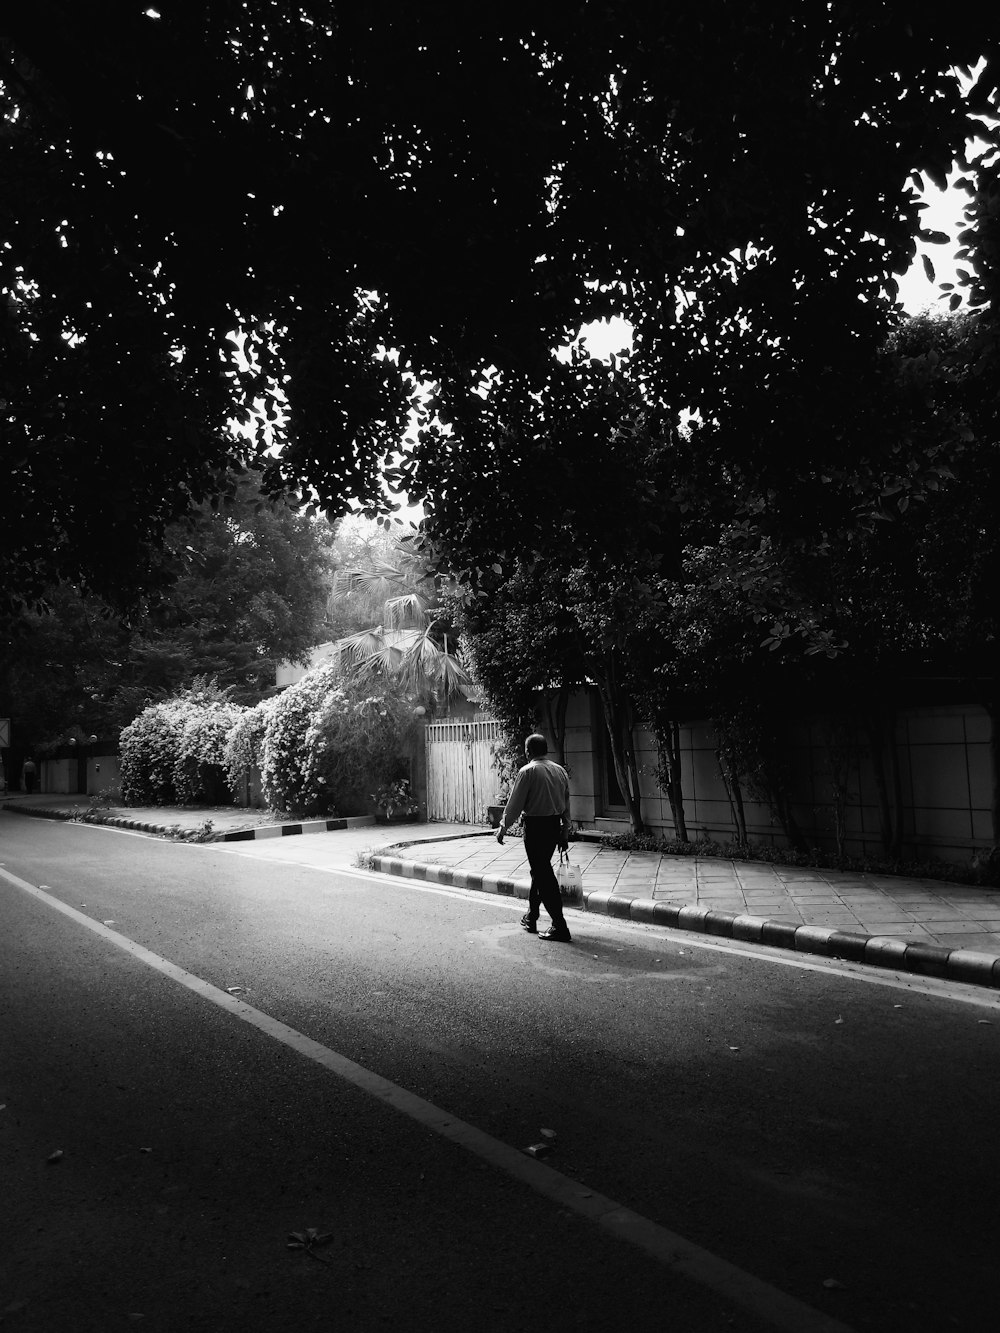 grayscale photo of man walking on road